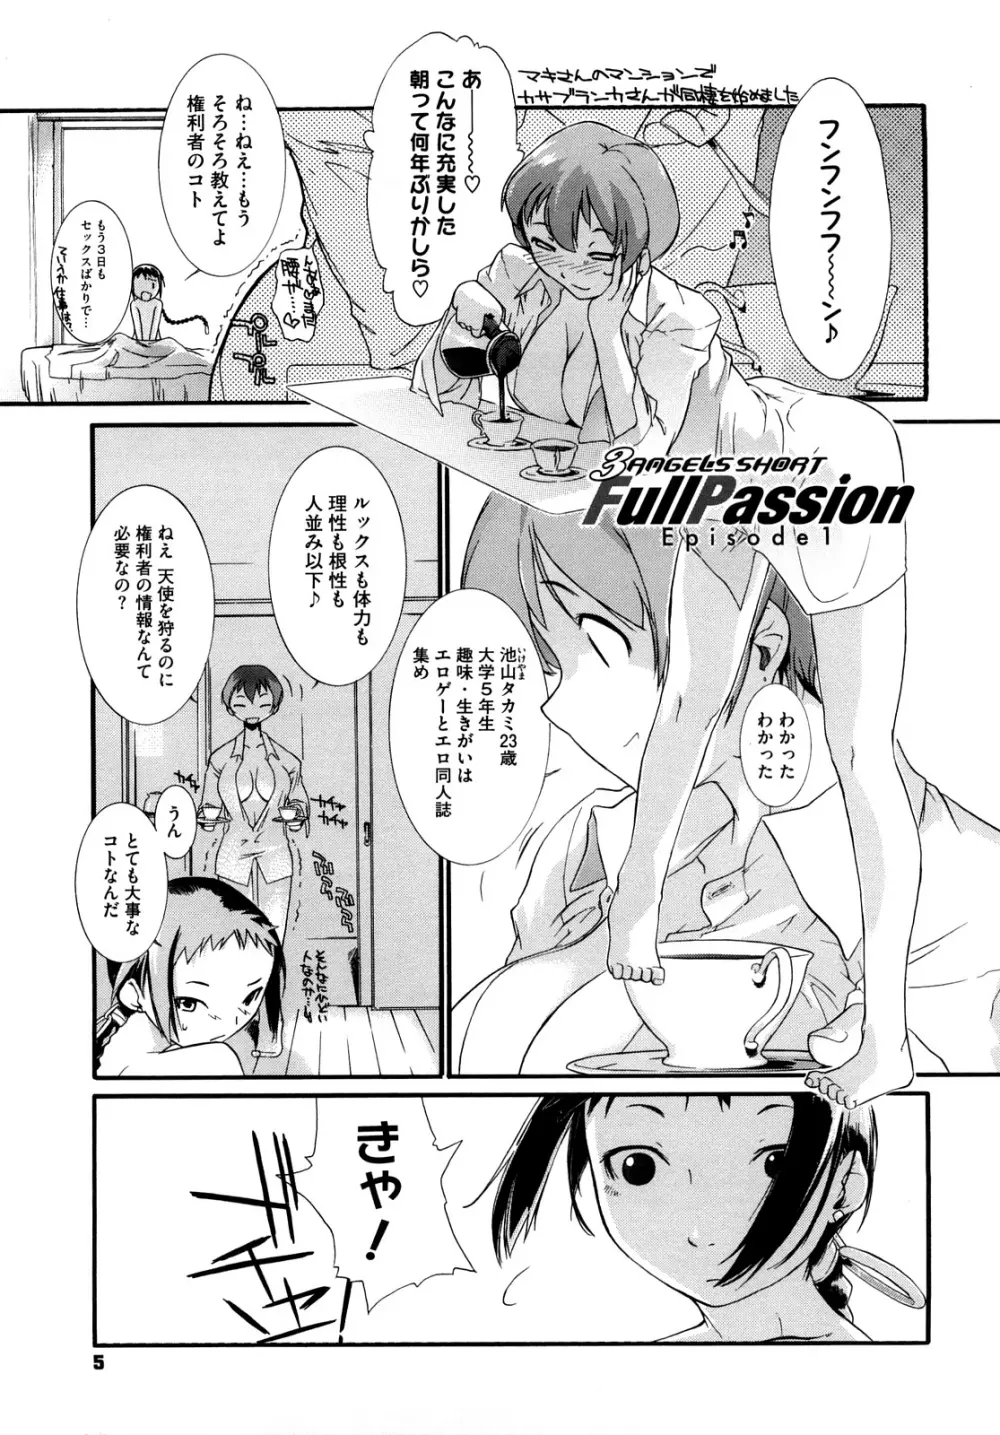 3ANGELS SHORT Full Passion Page.8